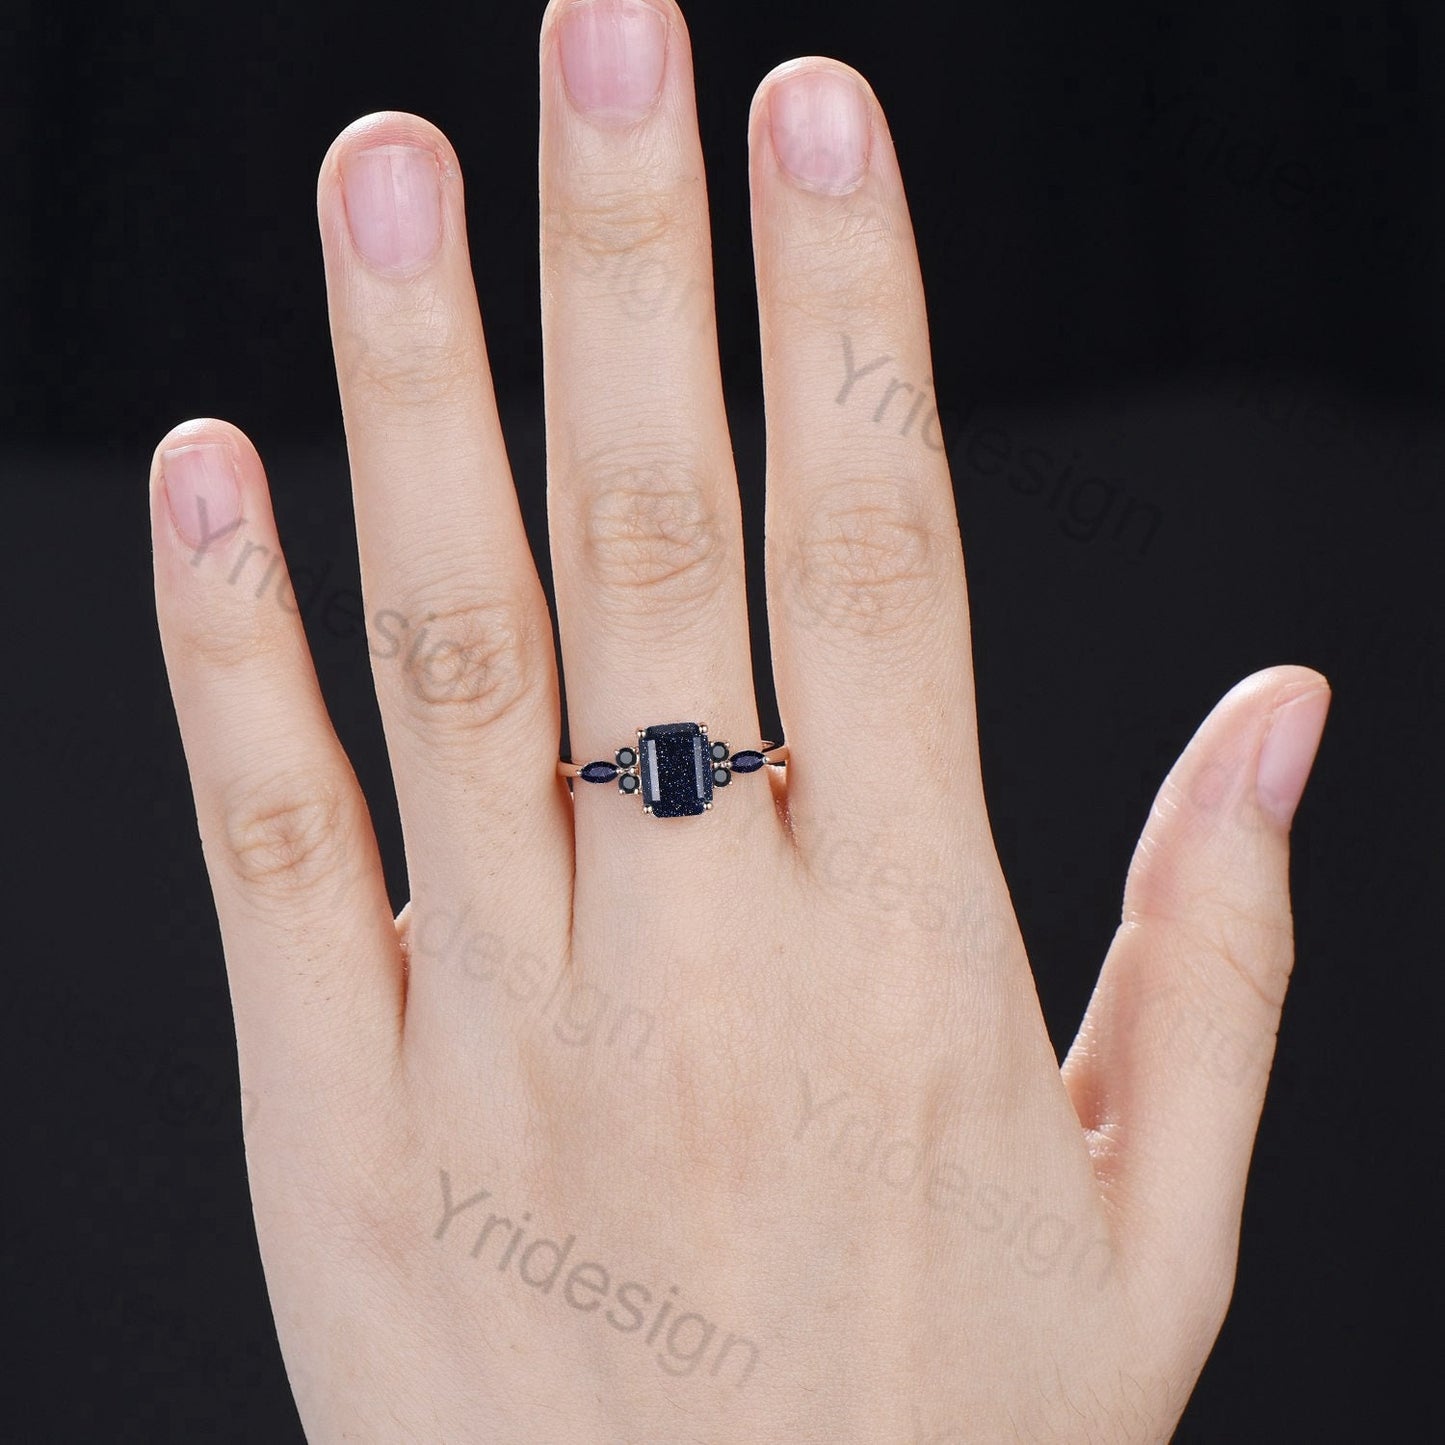 2ct Emerald Cut Blue Sandstone Cluster Engagement Rings Galaxy Starry Sky Ring Black Gemstone Ring Unique Handmade Proposal Gifts for Women - PENFINE